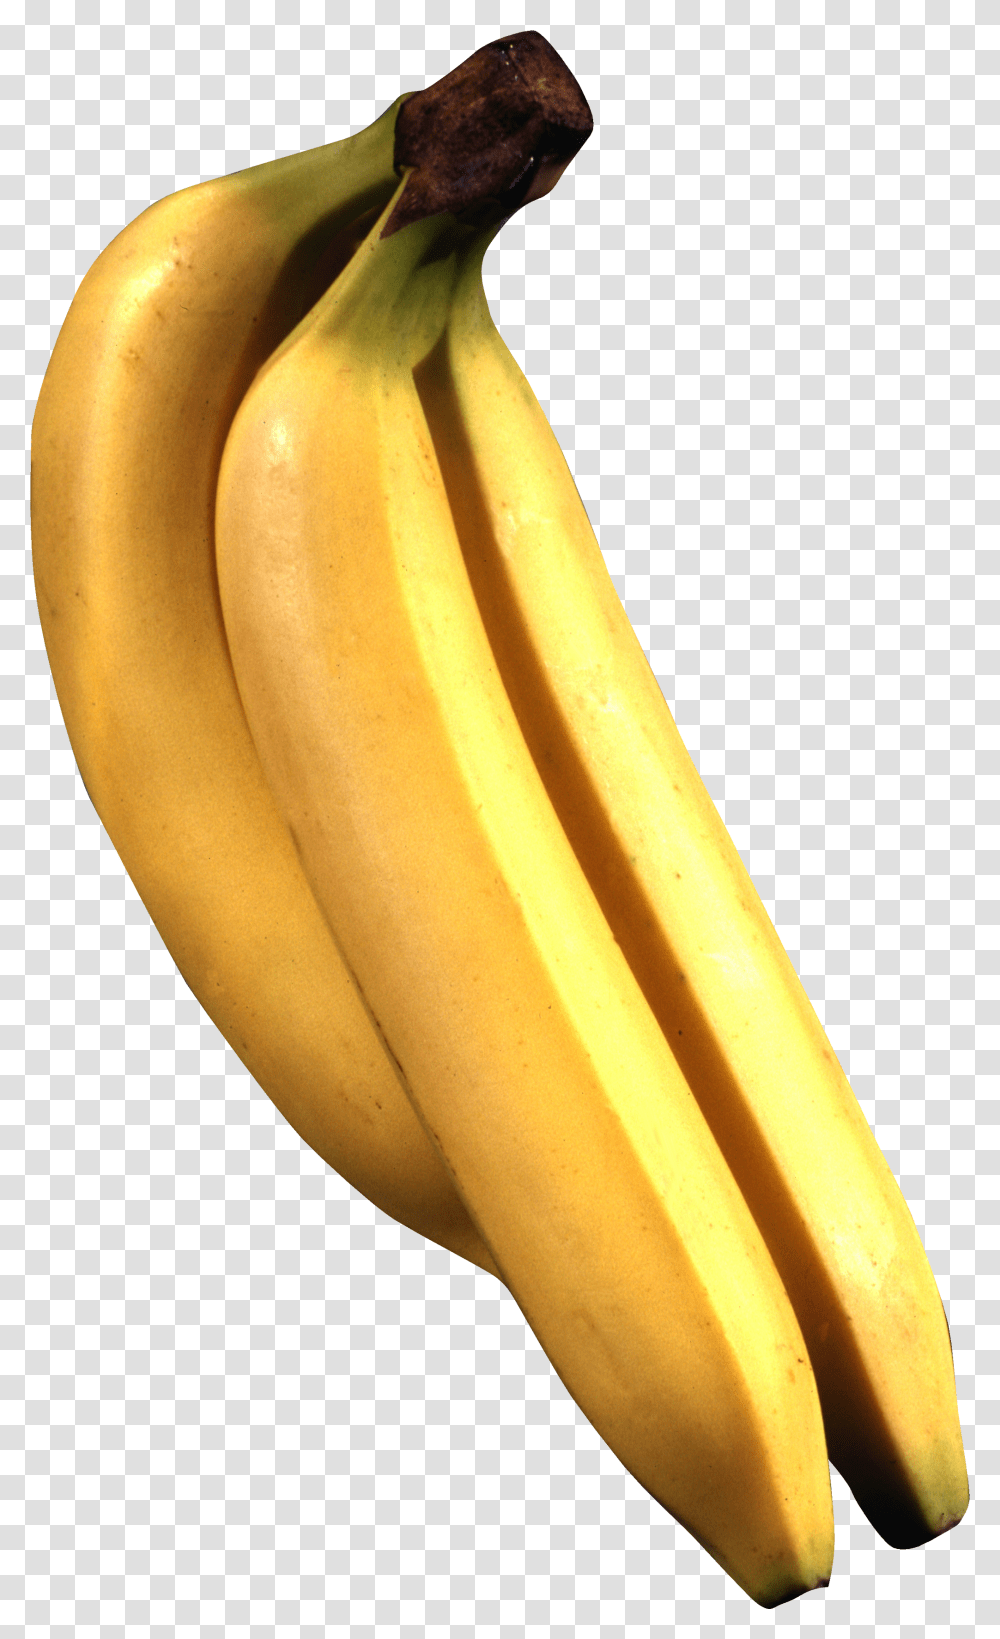 Grab And Download Banana In High Resolution Banana Pictures Download, Fruit, Plant Transparent Png